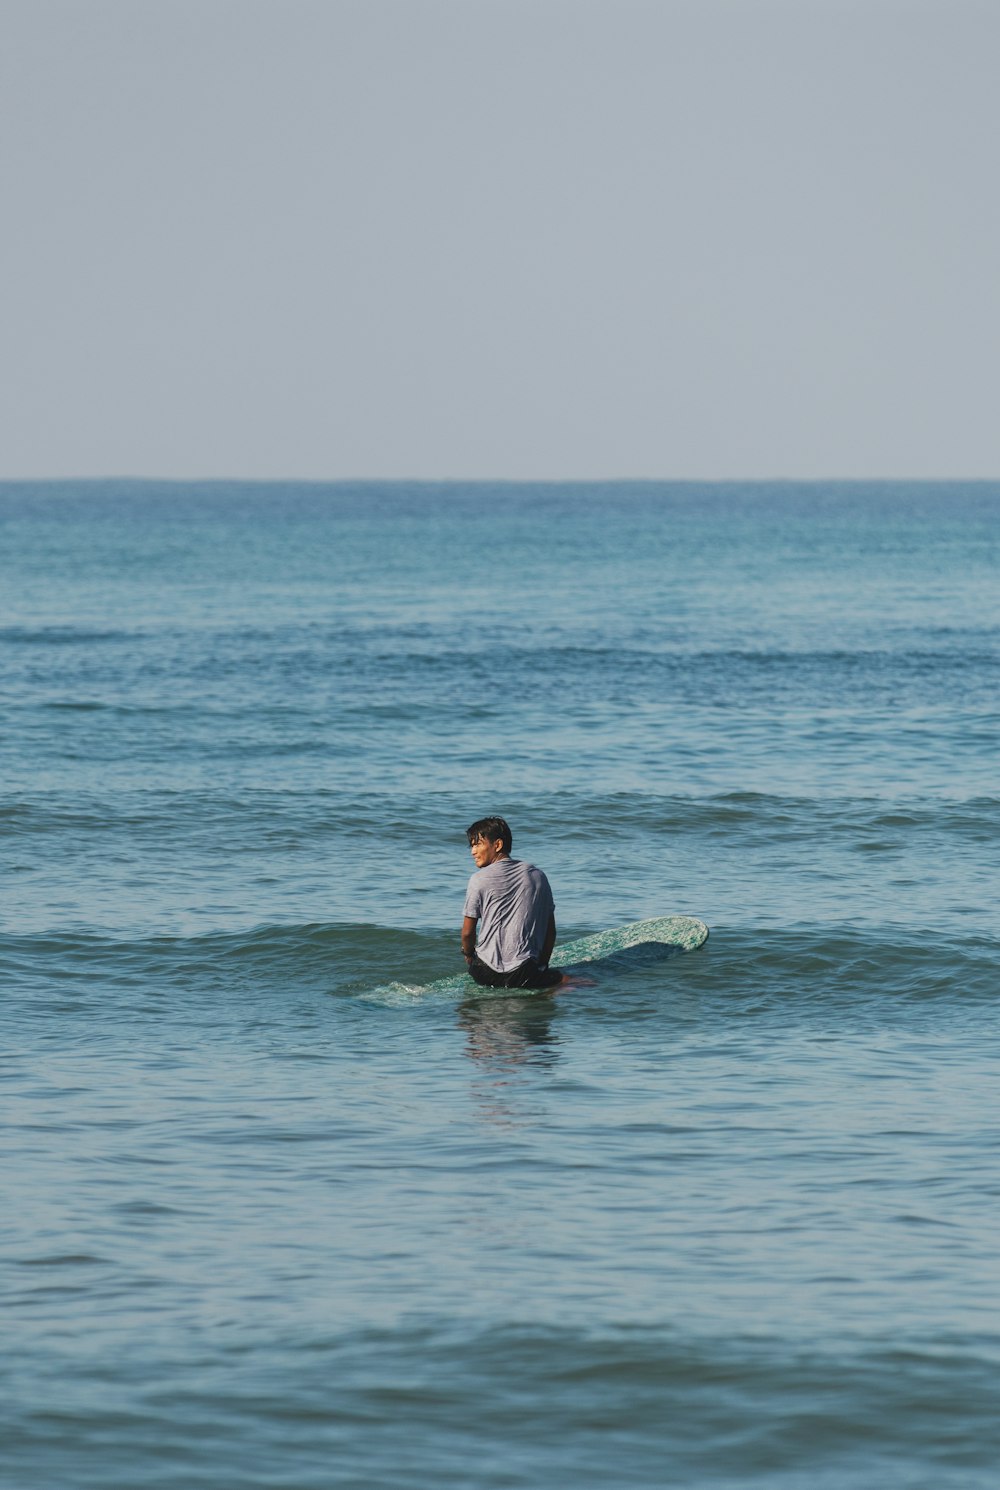 a man sitting on a surfboard in the ocean